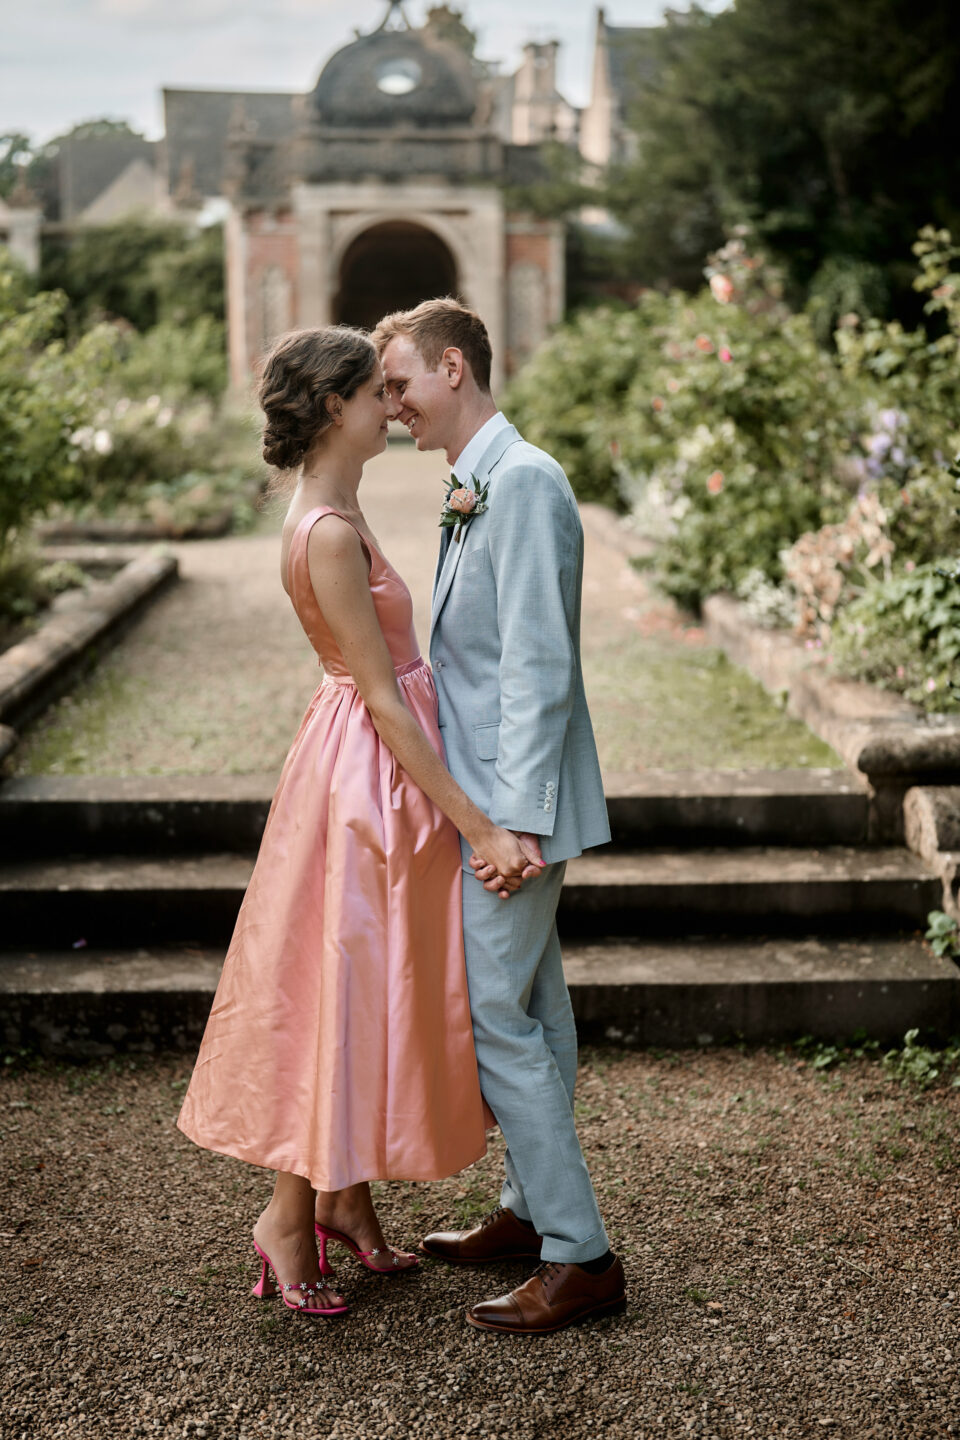 A couple getting married are sharing a kiss in front of a garden.